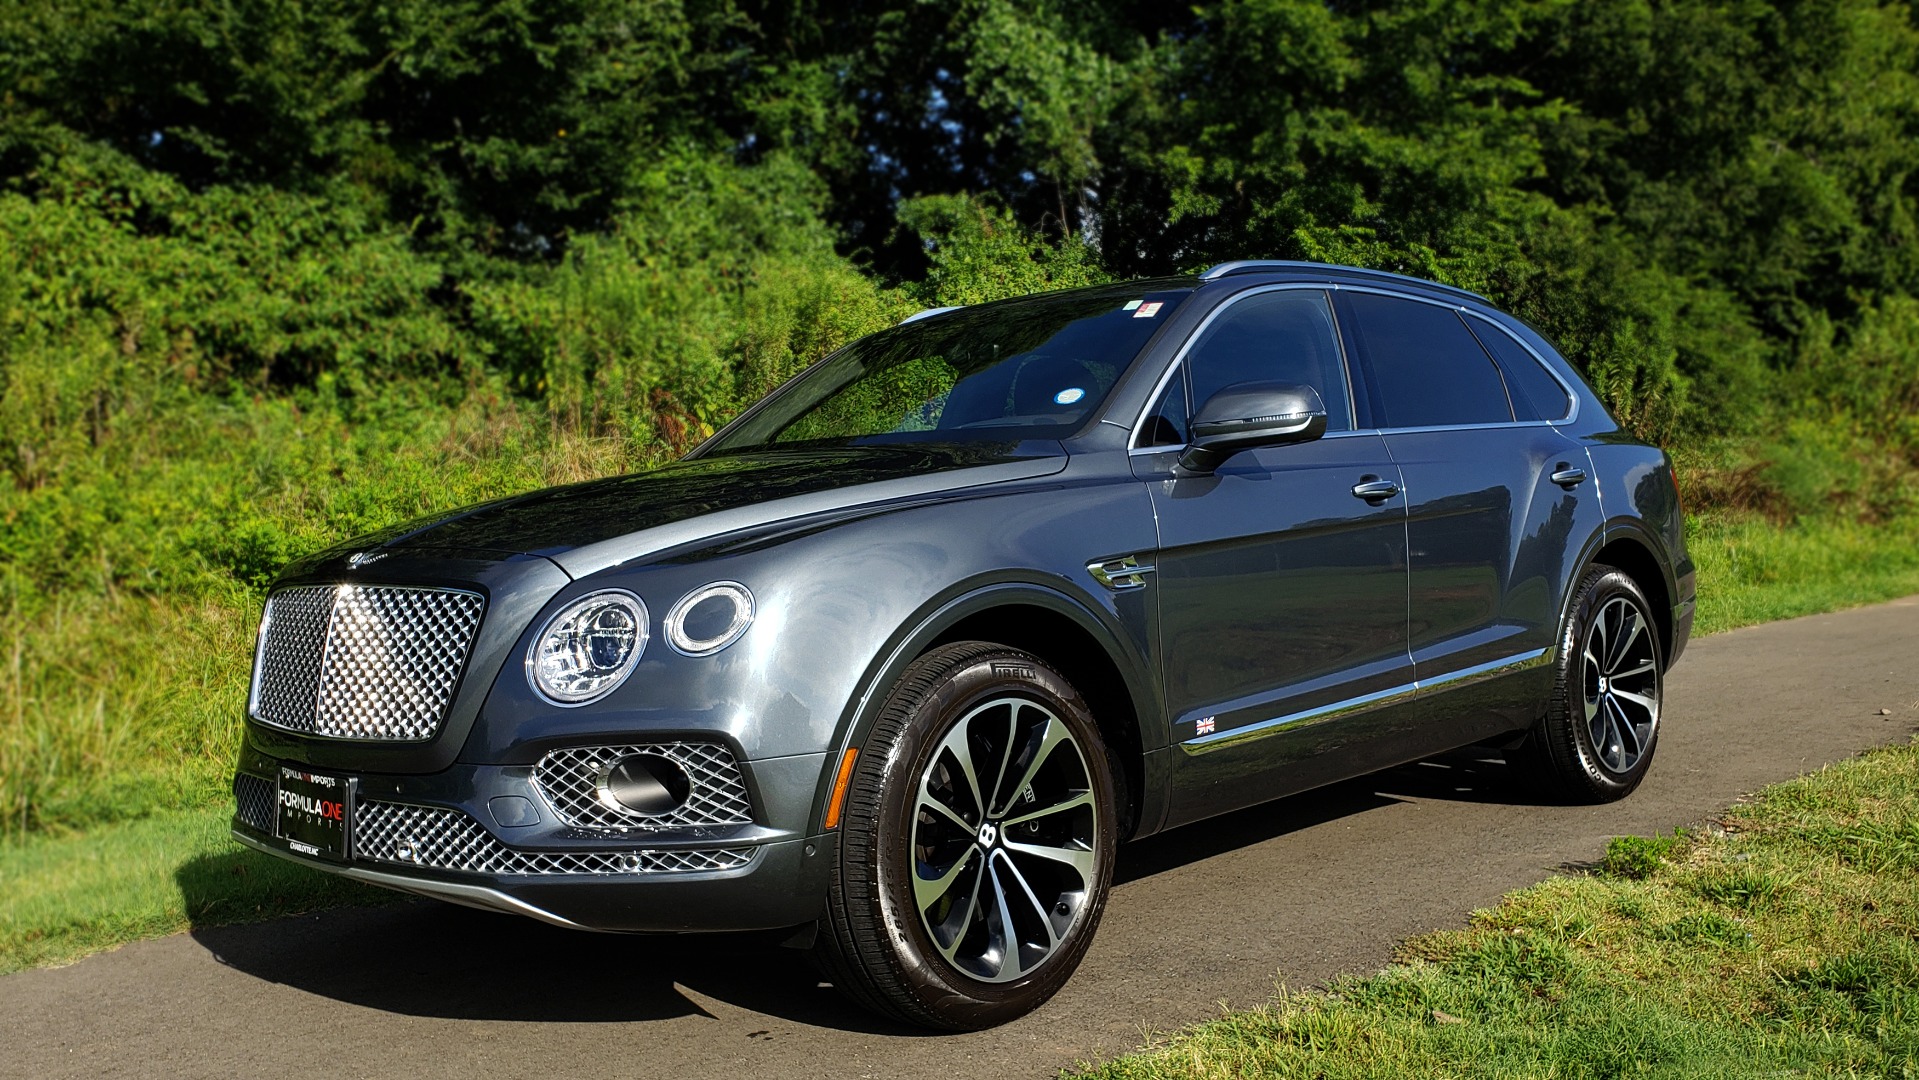 Used 2017 Bentley BENTAYGA W12 600HP / NAV / HTD SEATS / PANO-ROOF / REARVIEW / 21IN WHEELS for sale Sold at Formula Imports in Charlotte NC 28227 3